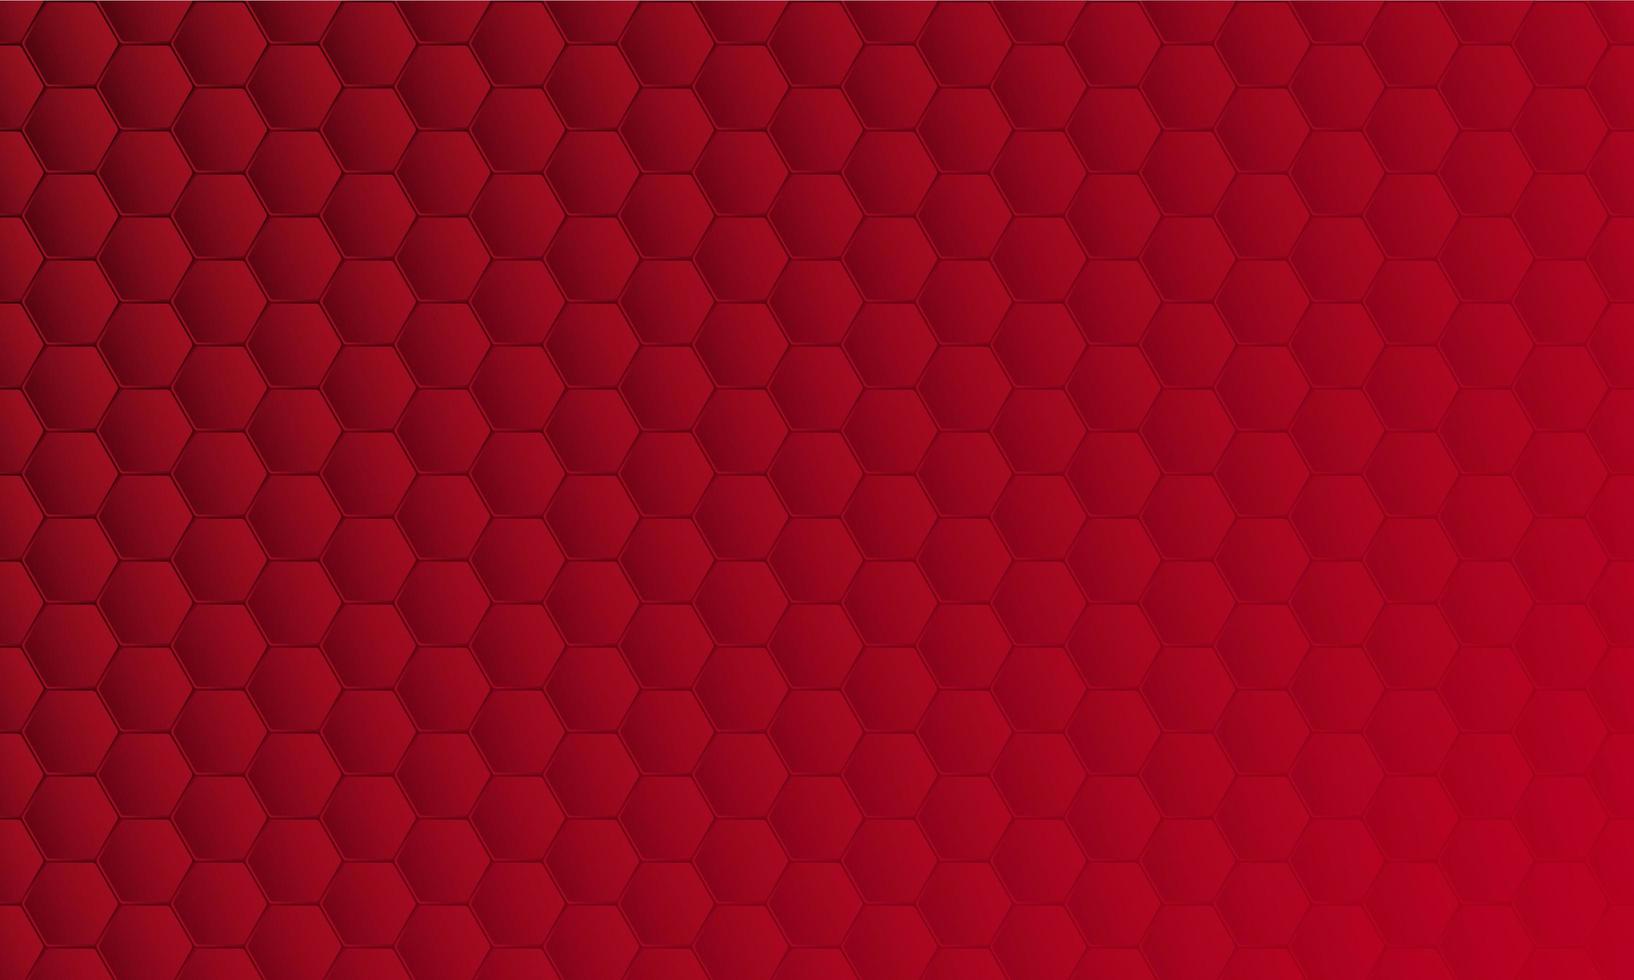 Red honeycomb composition pattern for futuristic and modern backgrounds. Abstract wallpaper design with metal plate style photo